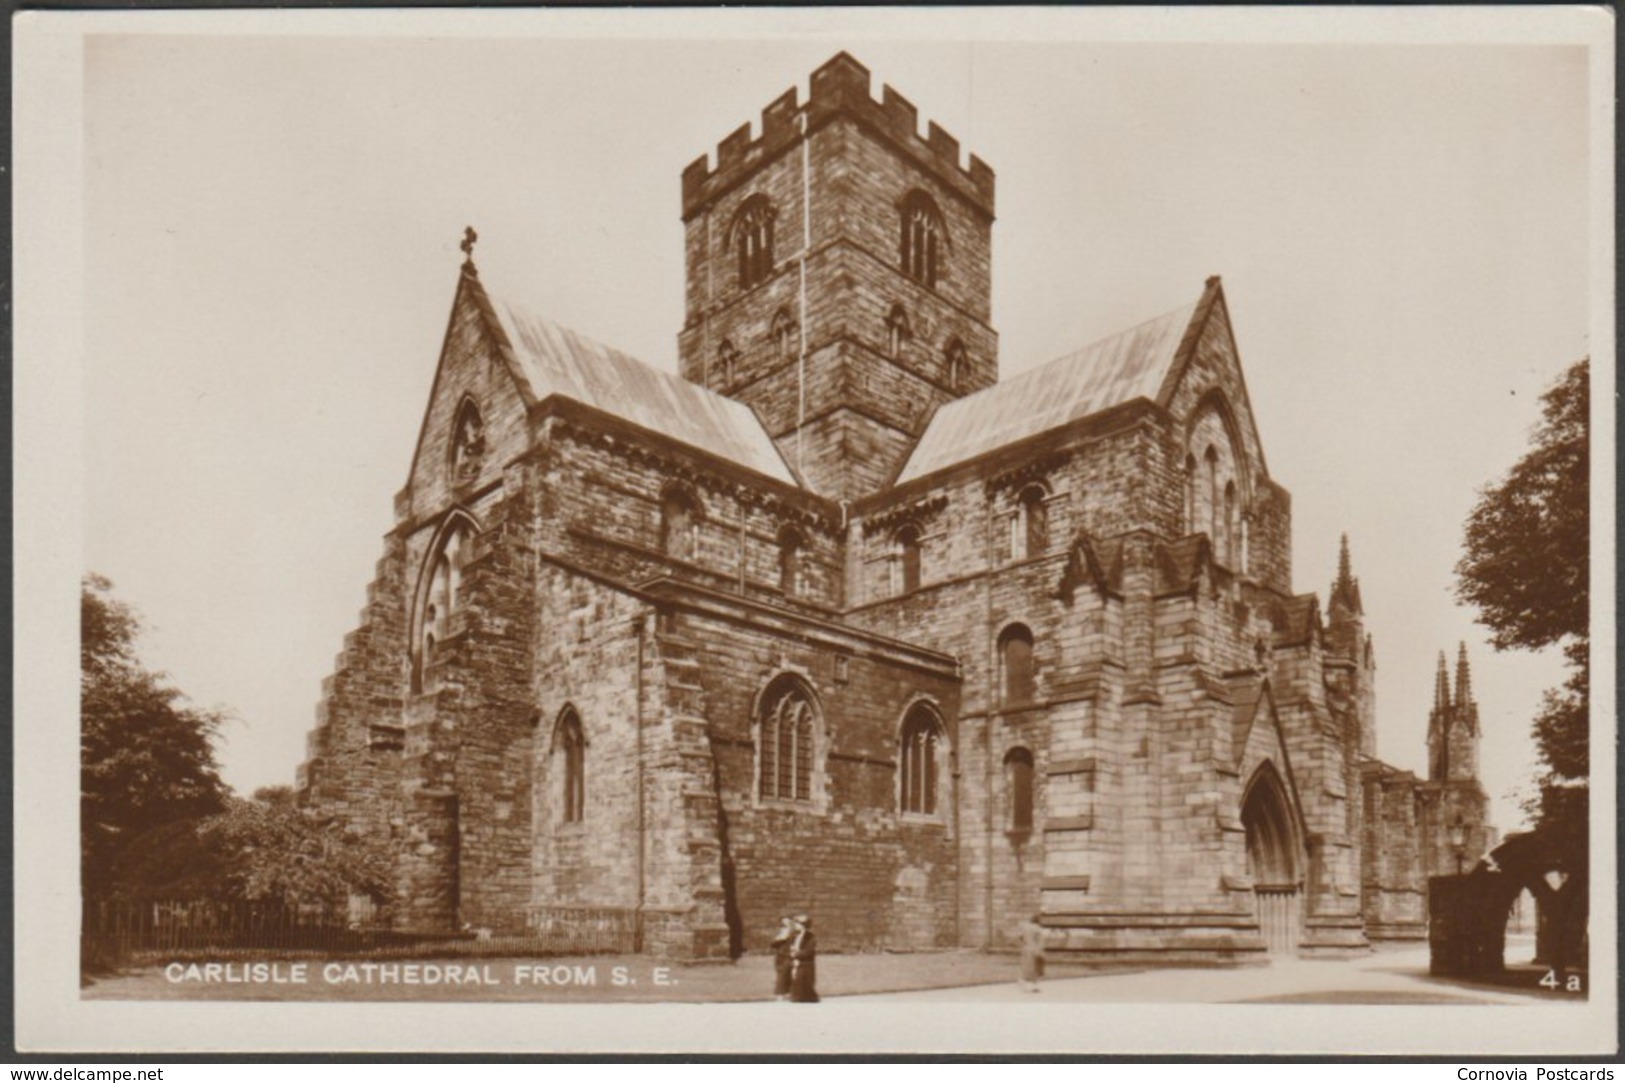 Carlisle Cathedral From South East, Cumberland, C.1930 - RP Postcard - Carlisle